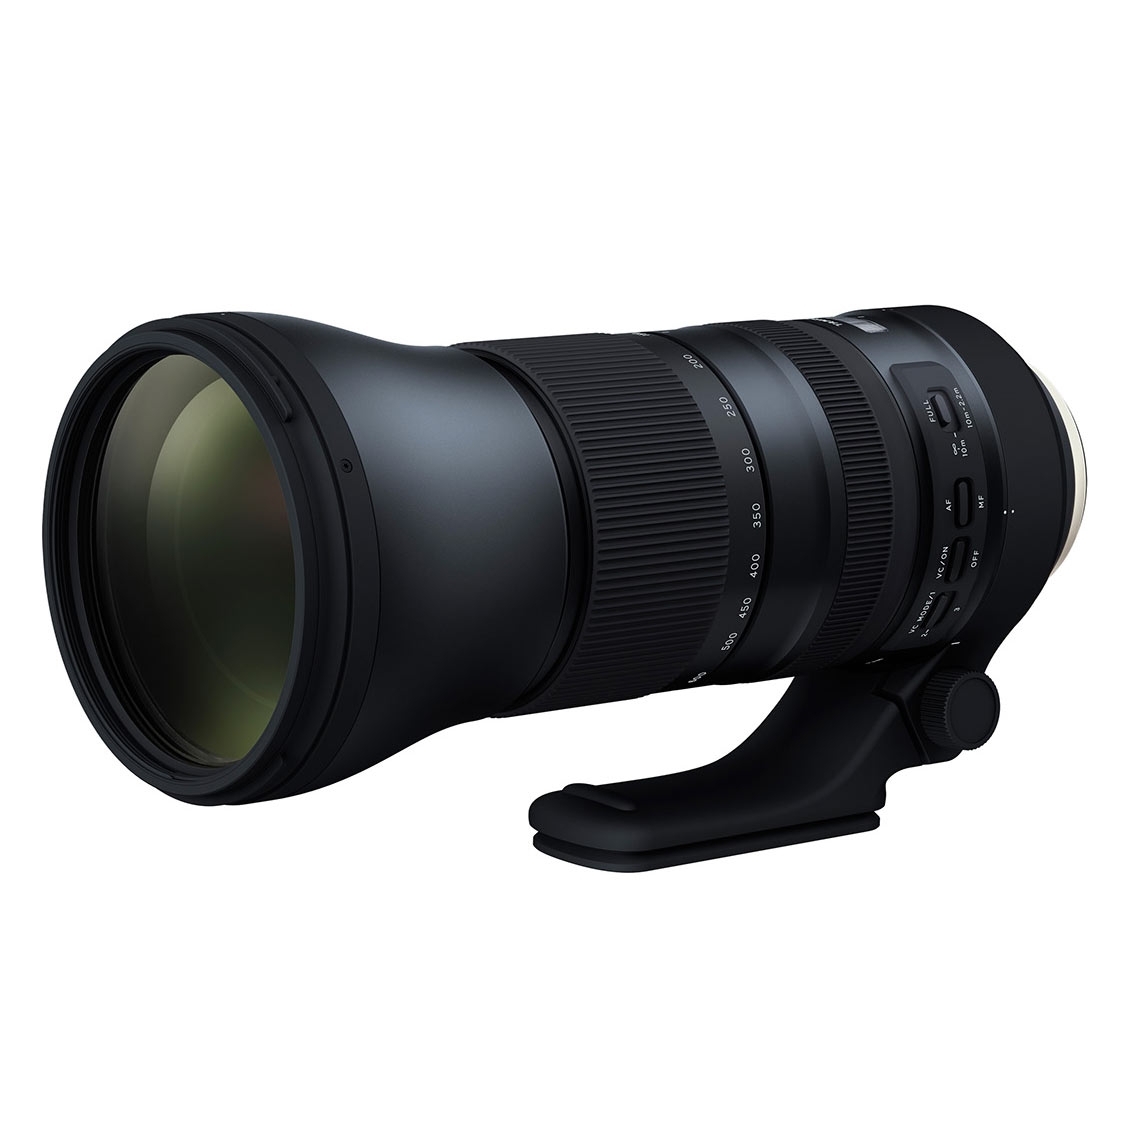 Tamron AF 150-600mm F5-6.3 G2 DI VC USD Lens for Canon EF Mount